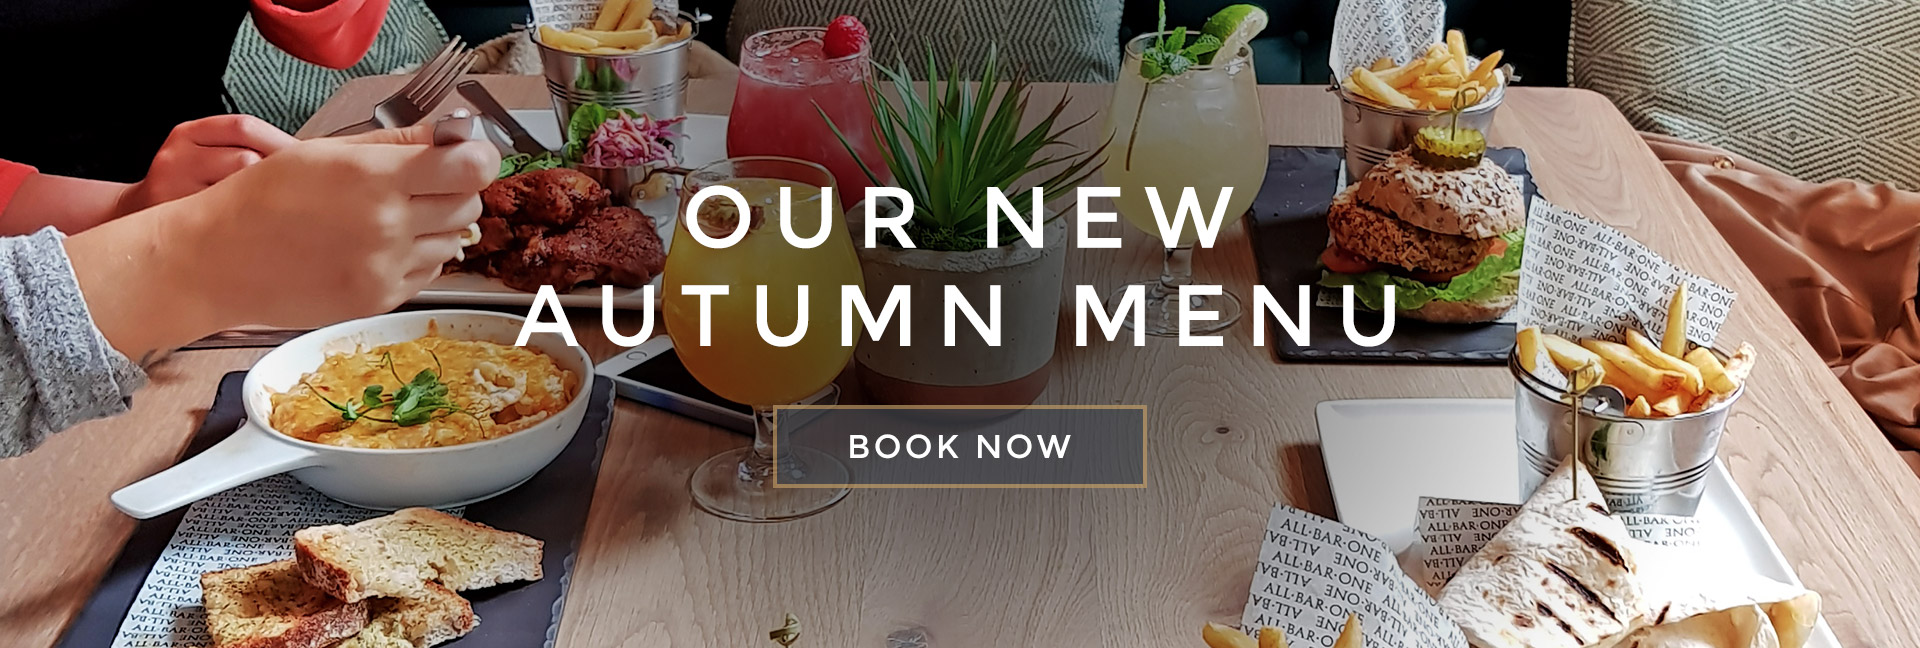 Our new Autumn menu at All Bar One Cheltenham - Book now